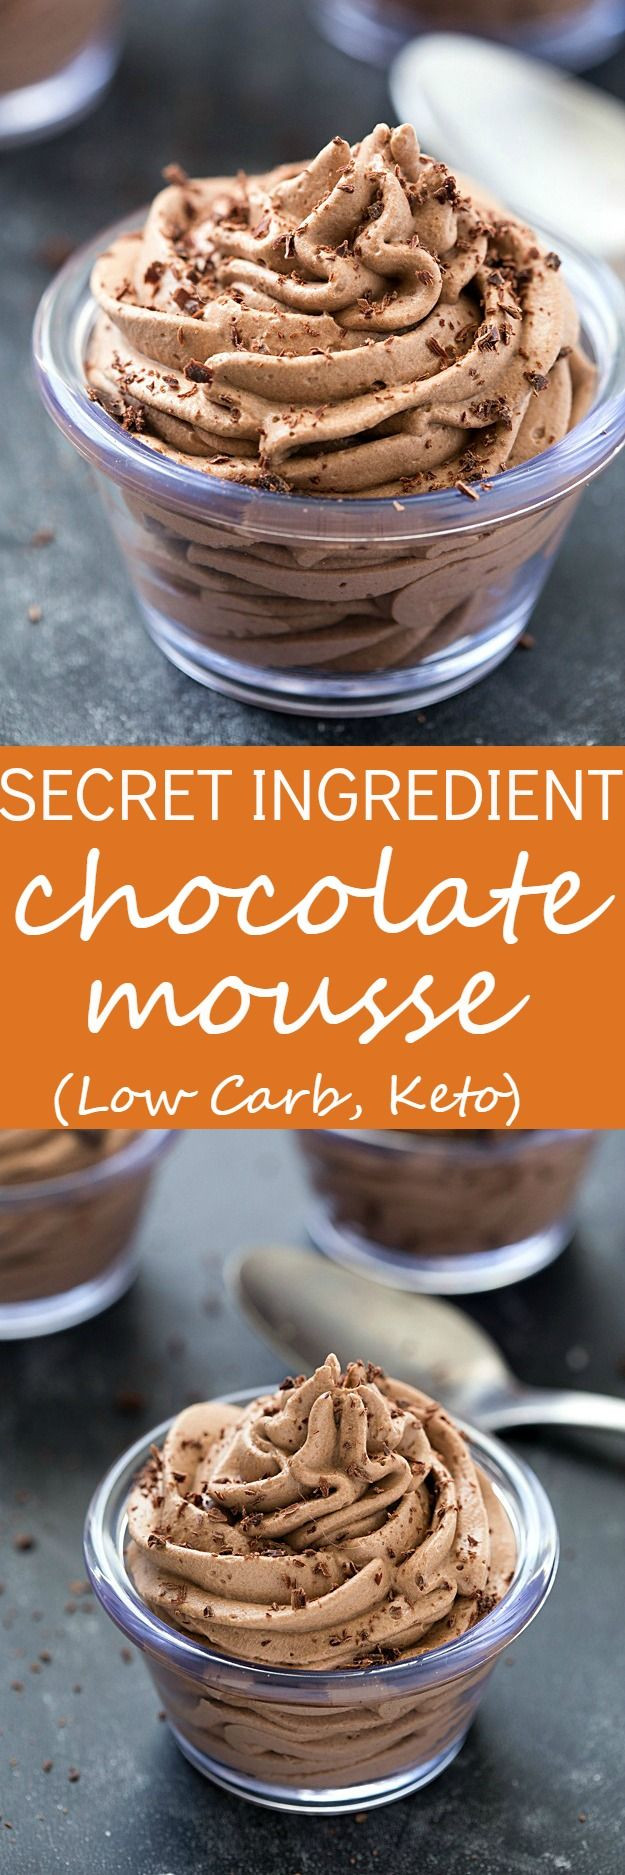 Keto Chocolate Mousse Recipe
 25 best ideas about Chocolate mousse recipe on Pinterest